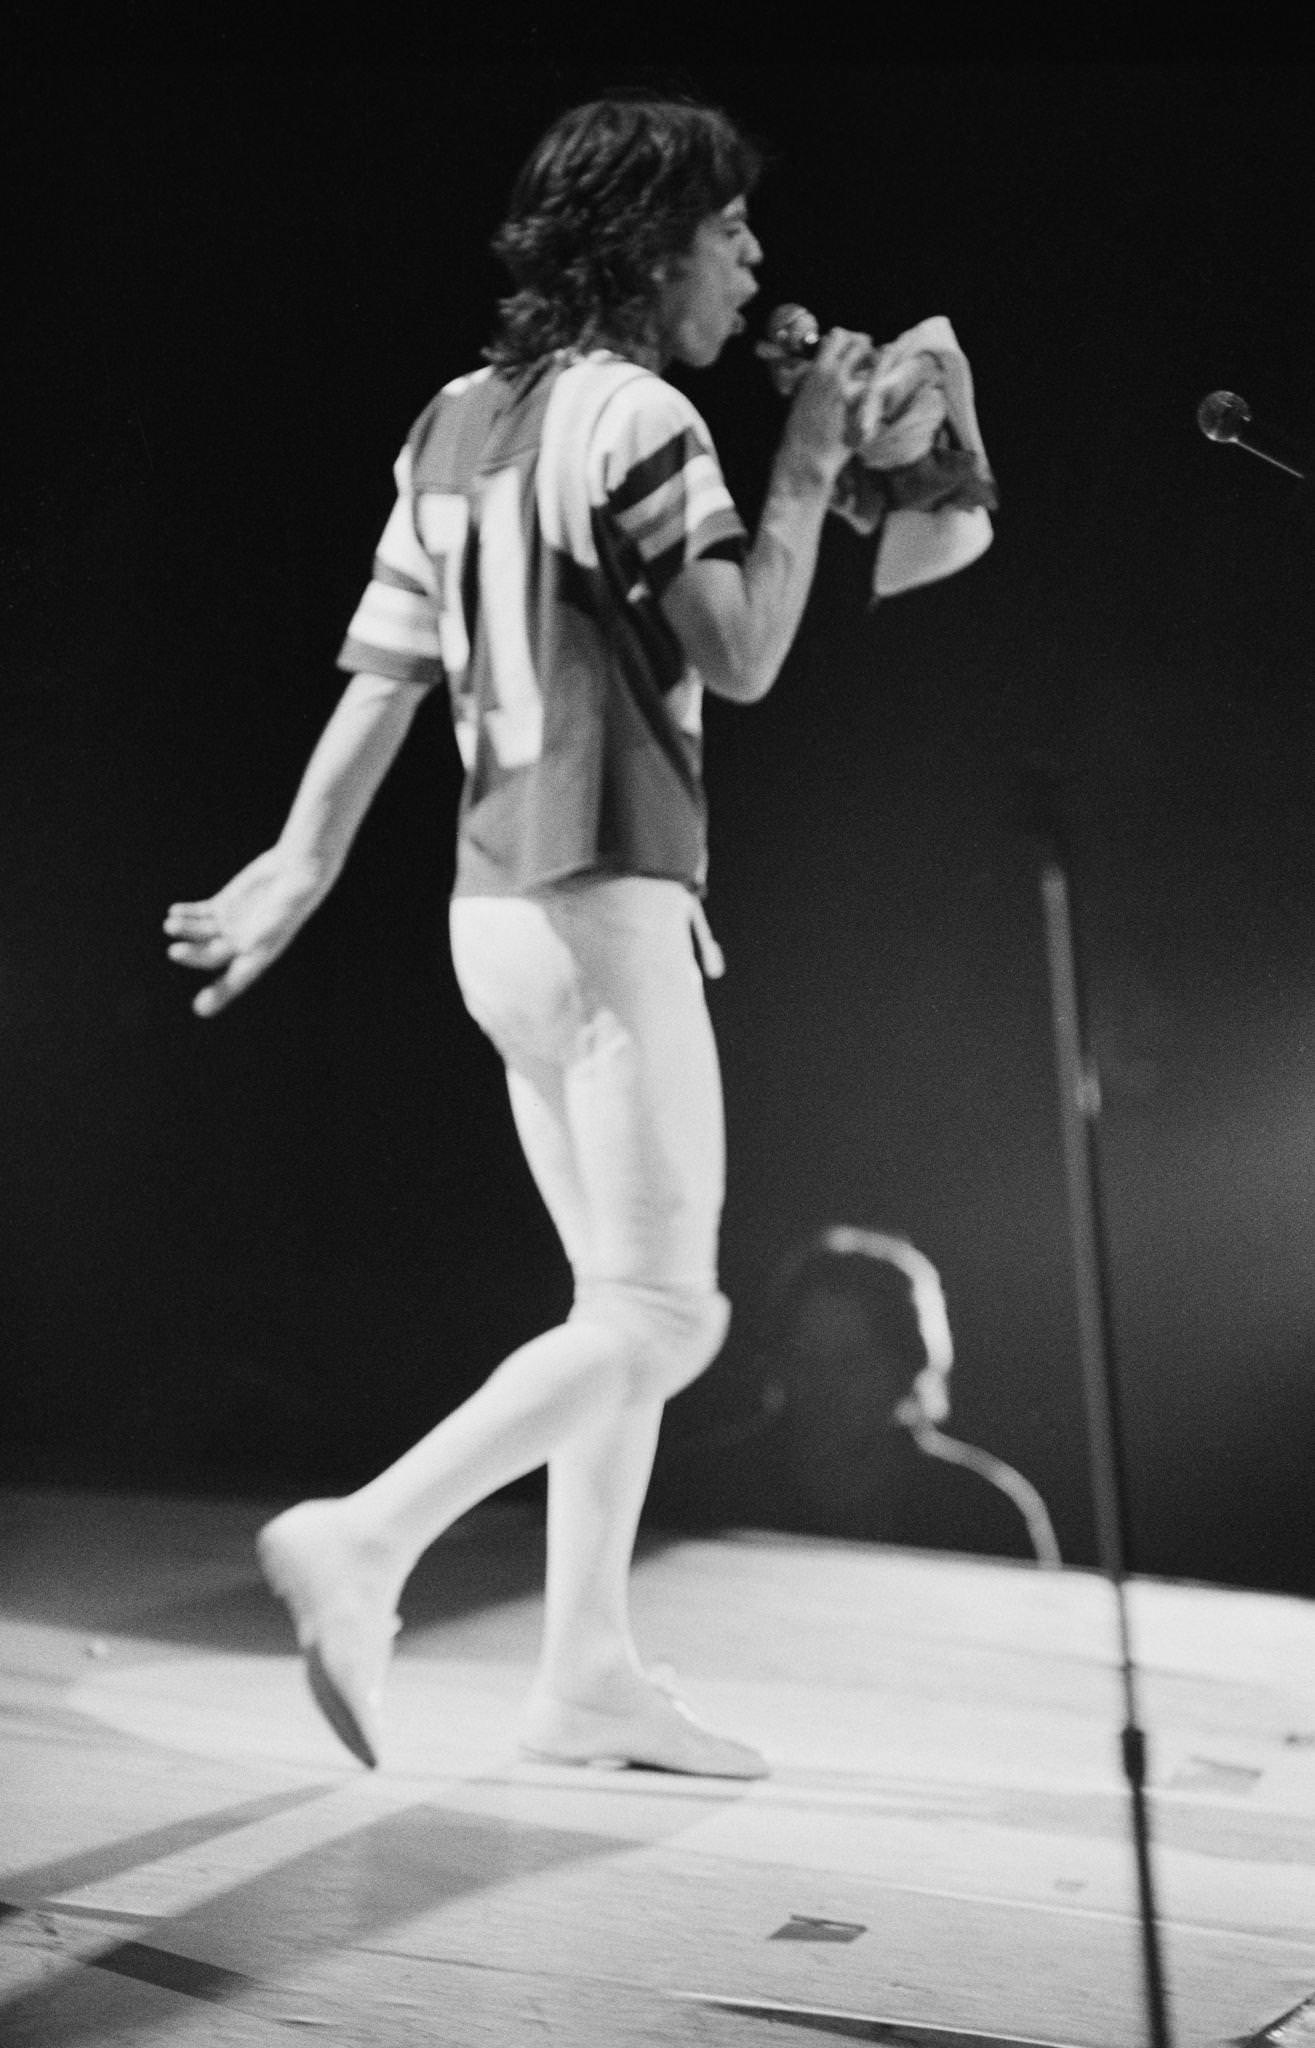 Mick Jagger, wearing an American football shirt, performs with The Rolling Stones , 1975.